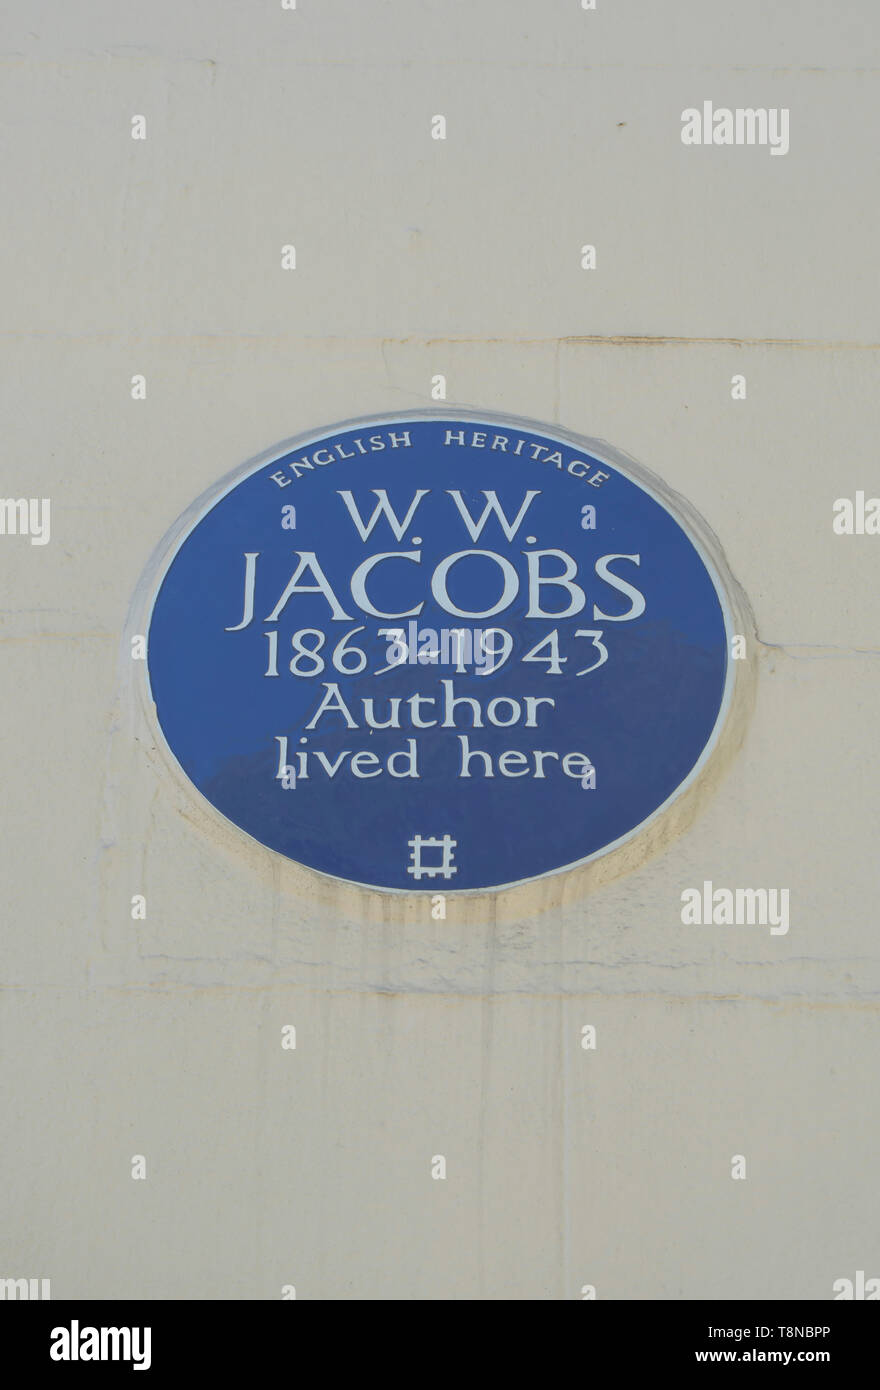 english heritage blue plaque marking a home of author ww jacobs, camden, london, england Stock Photo